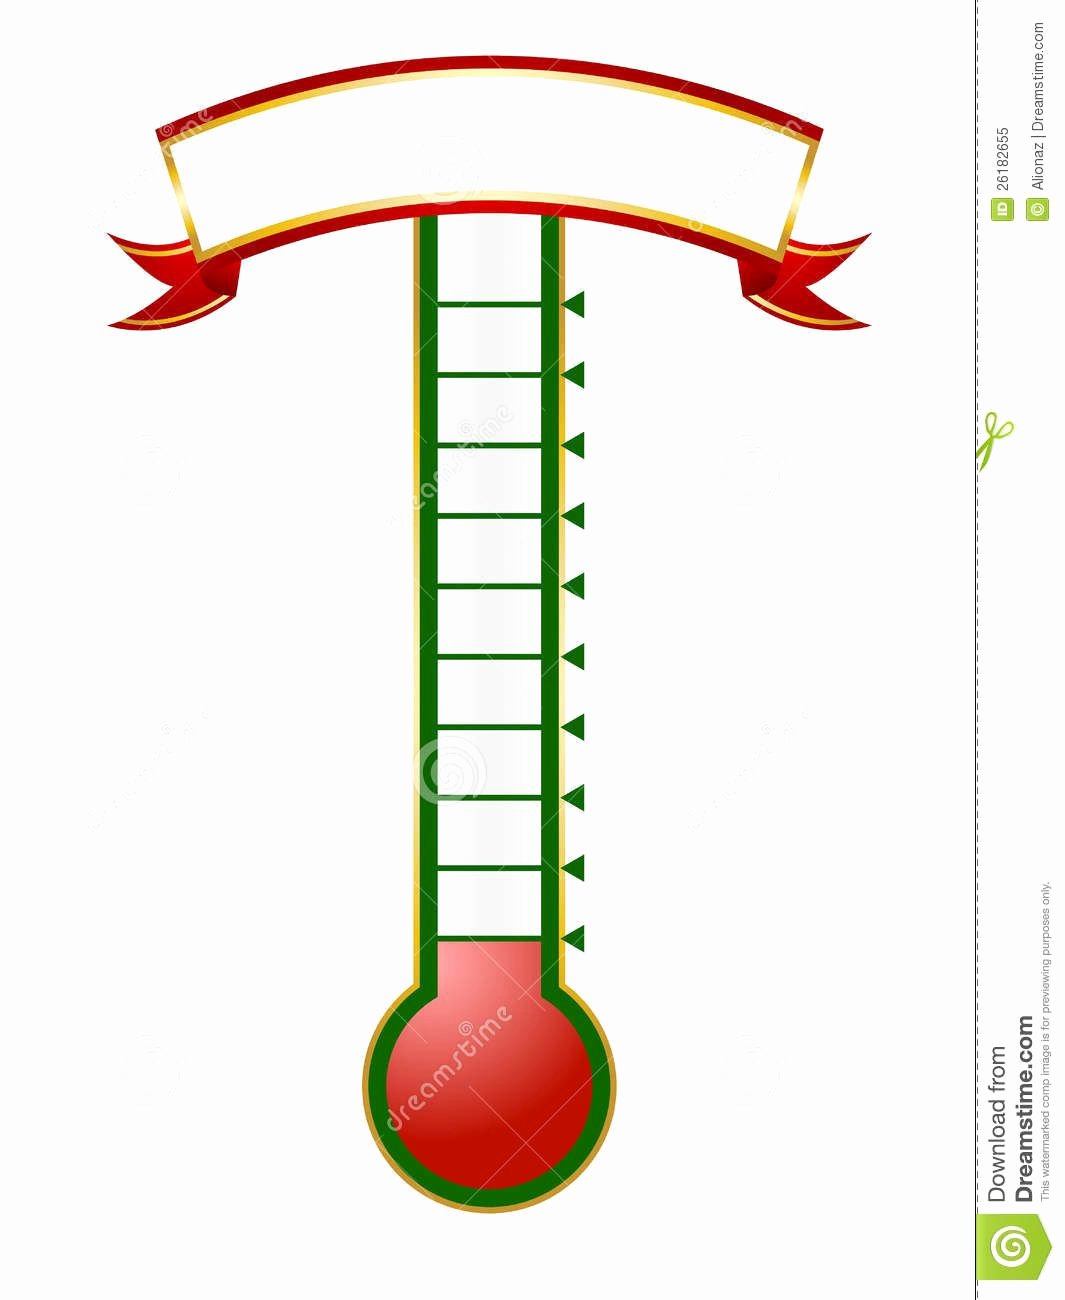 Fundraising thermometer Excel Inspirational thermometer Template